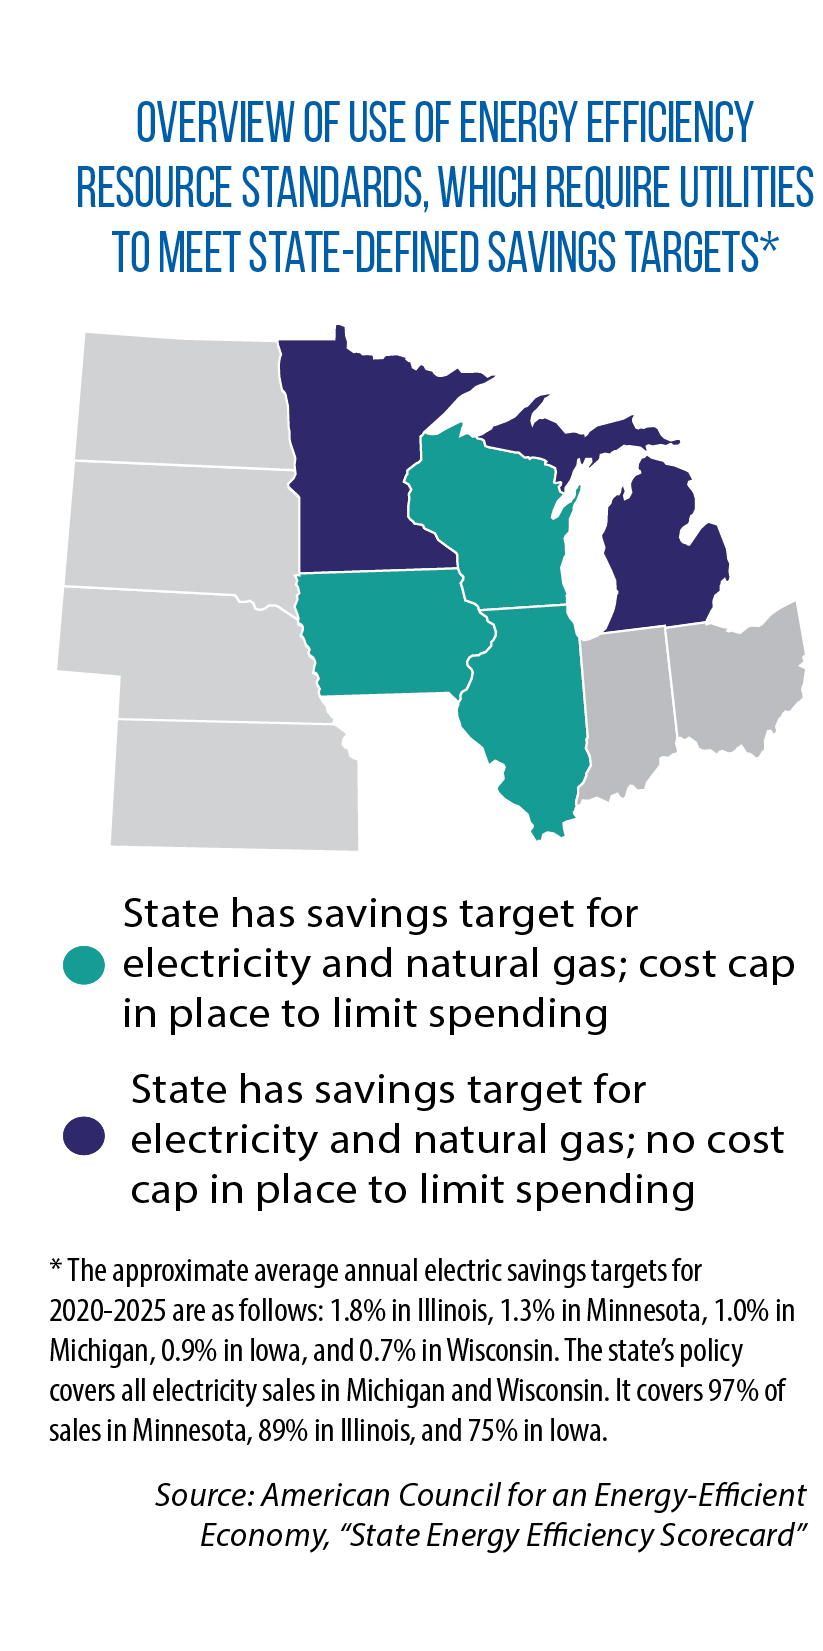 Map of Midwestern states with energy efficiency resource standards